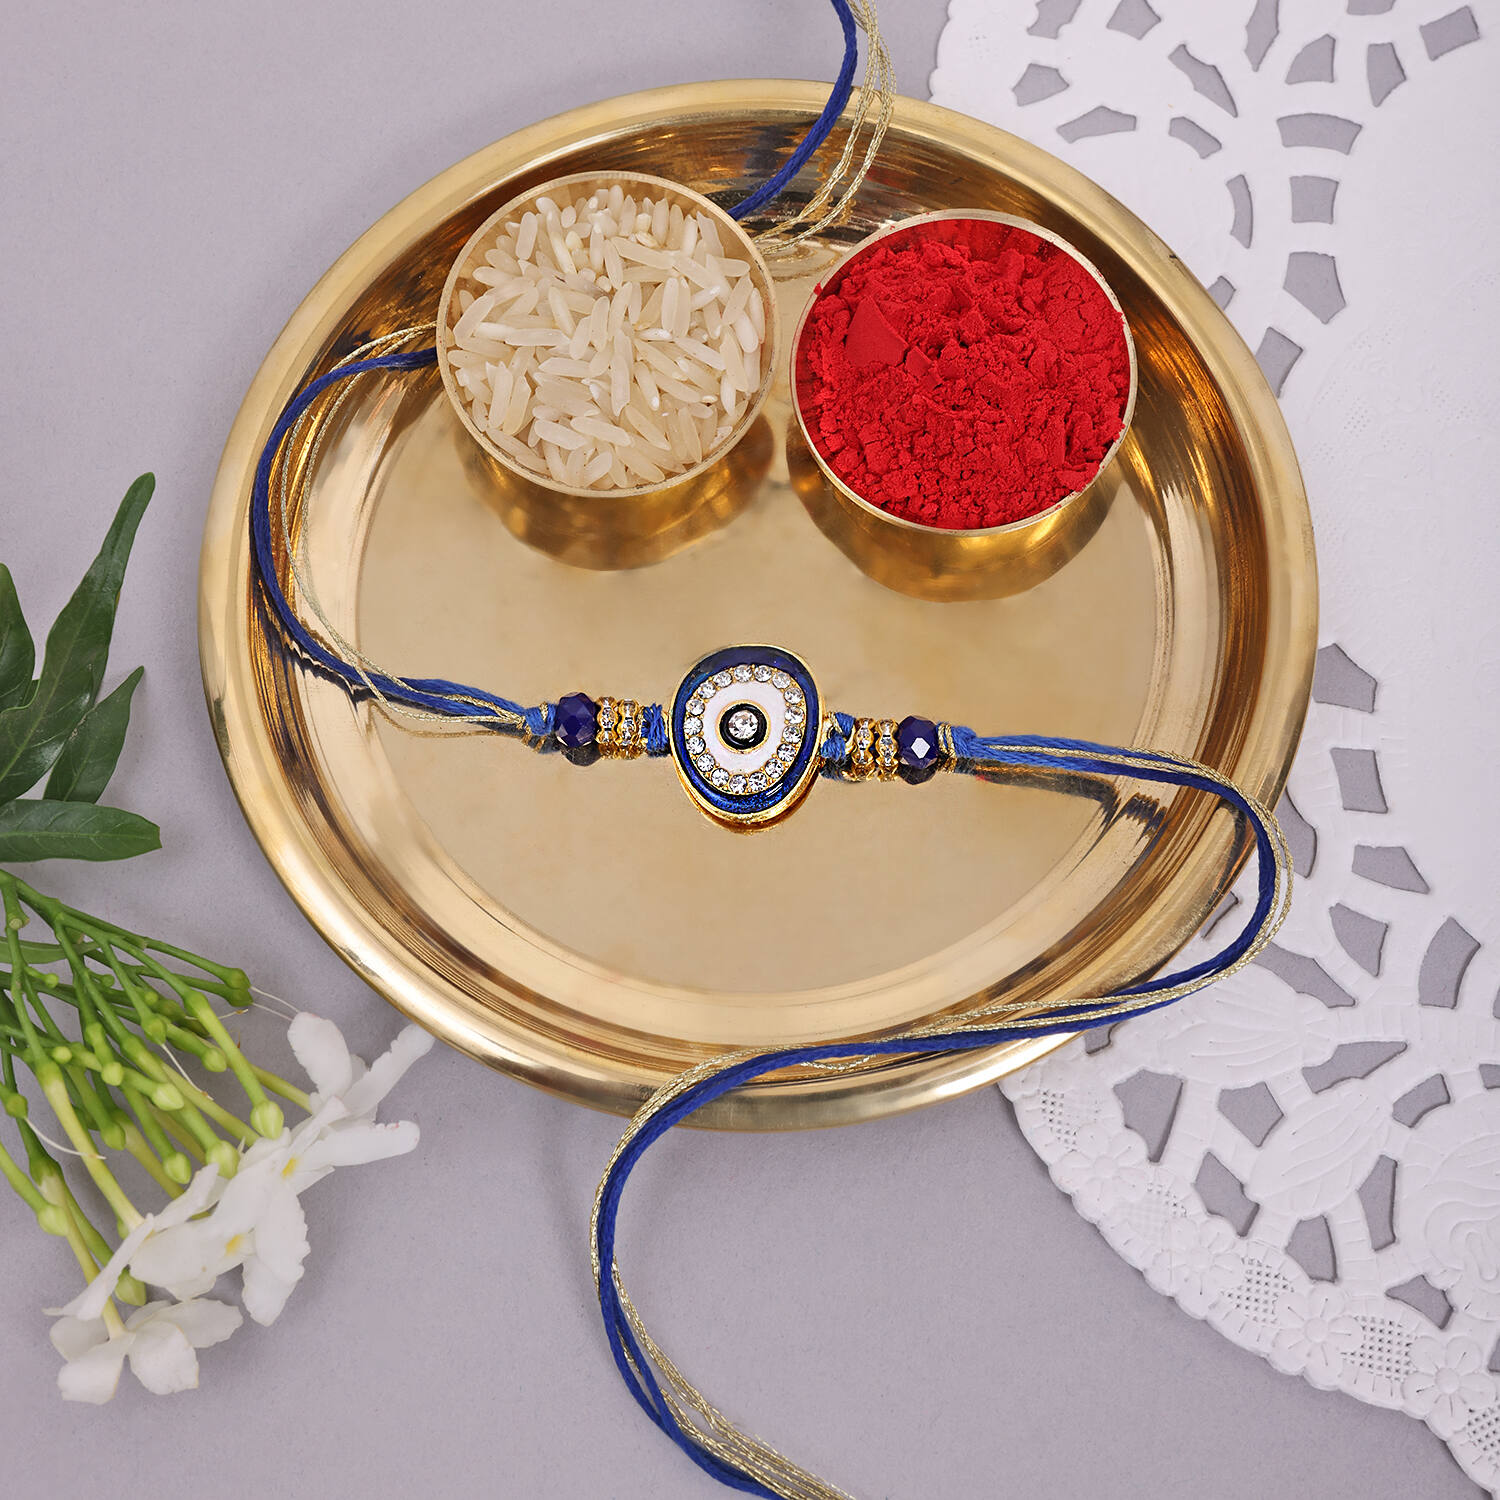 Top 5 Rakhi Gifts to Send to Your Brother in India